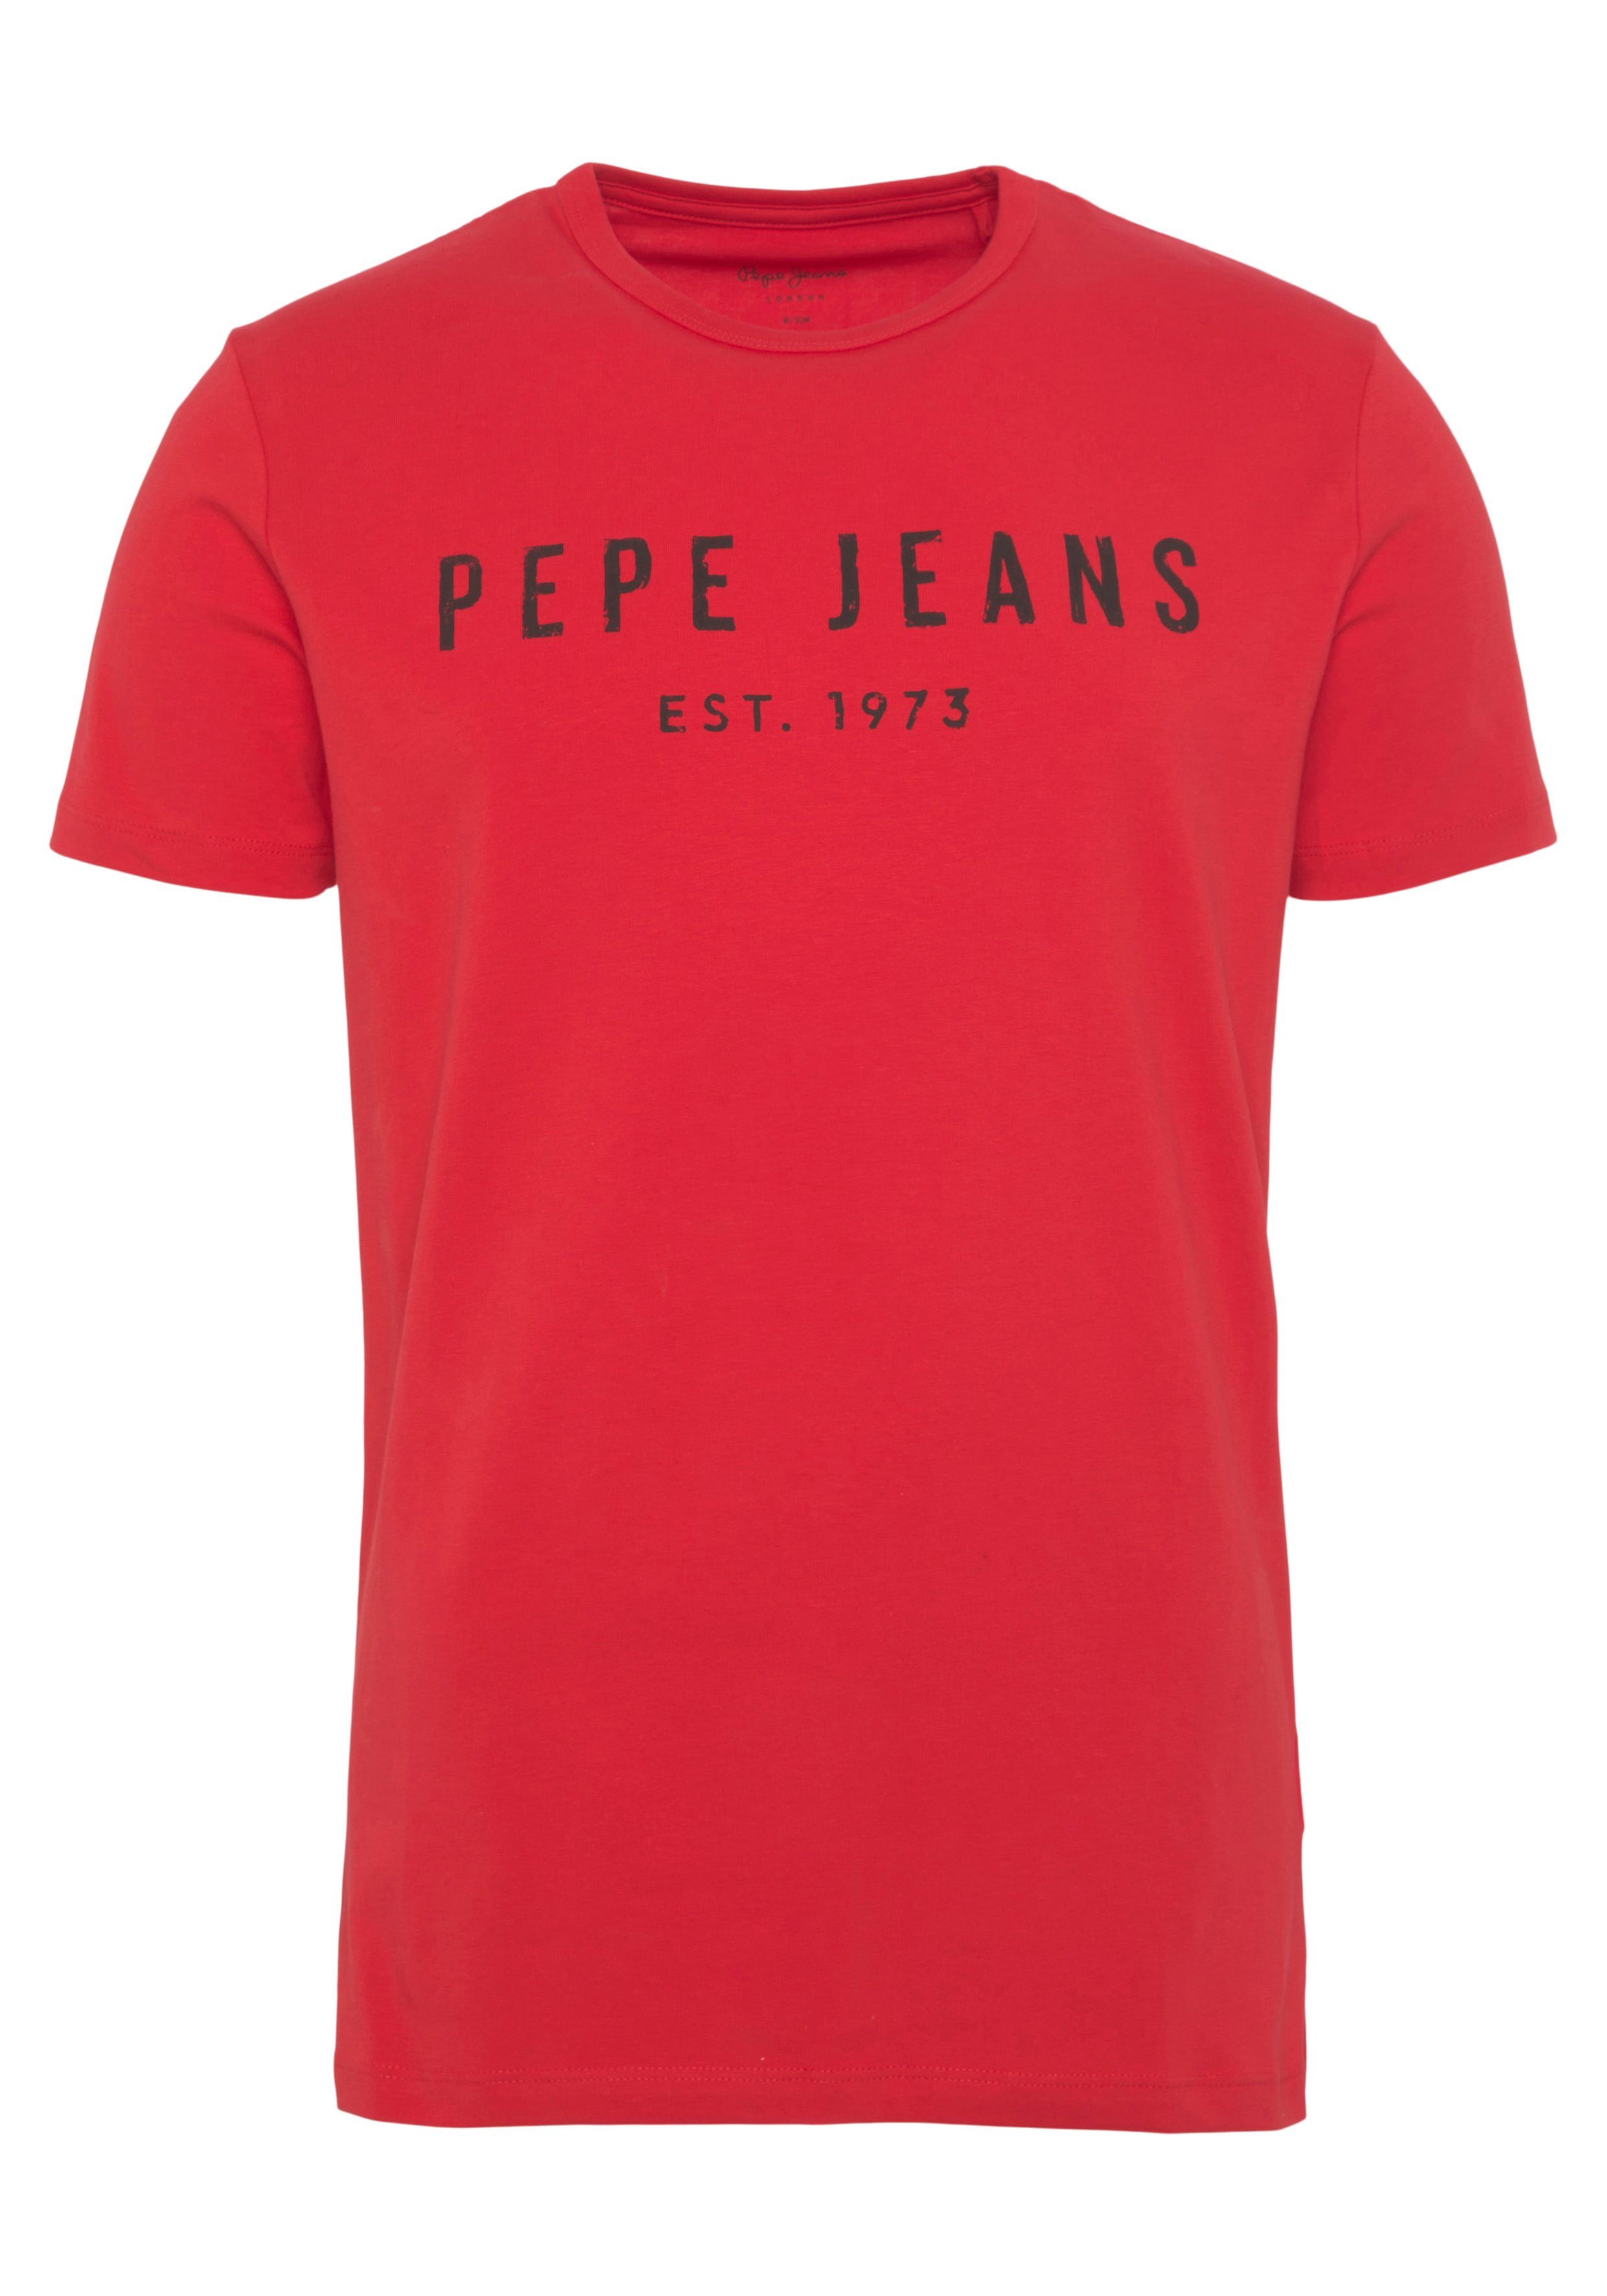 T-Shirt Jeans rot Pepe